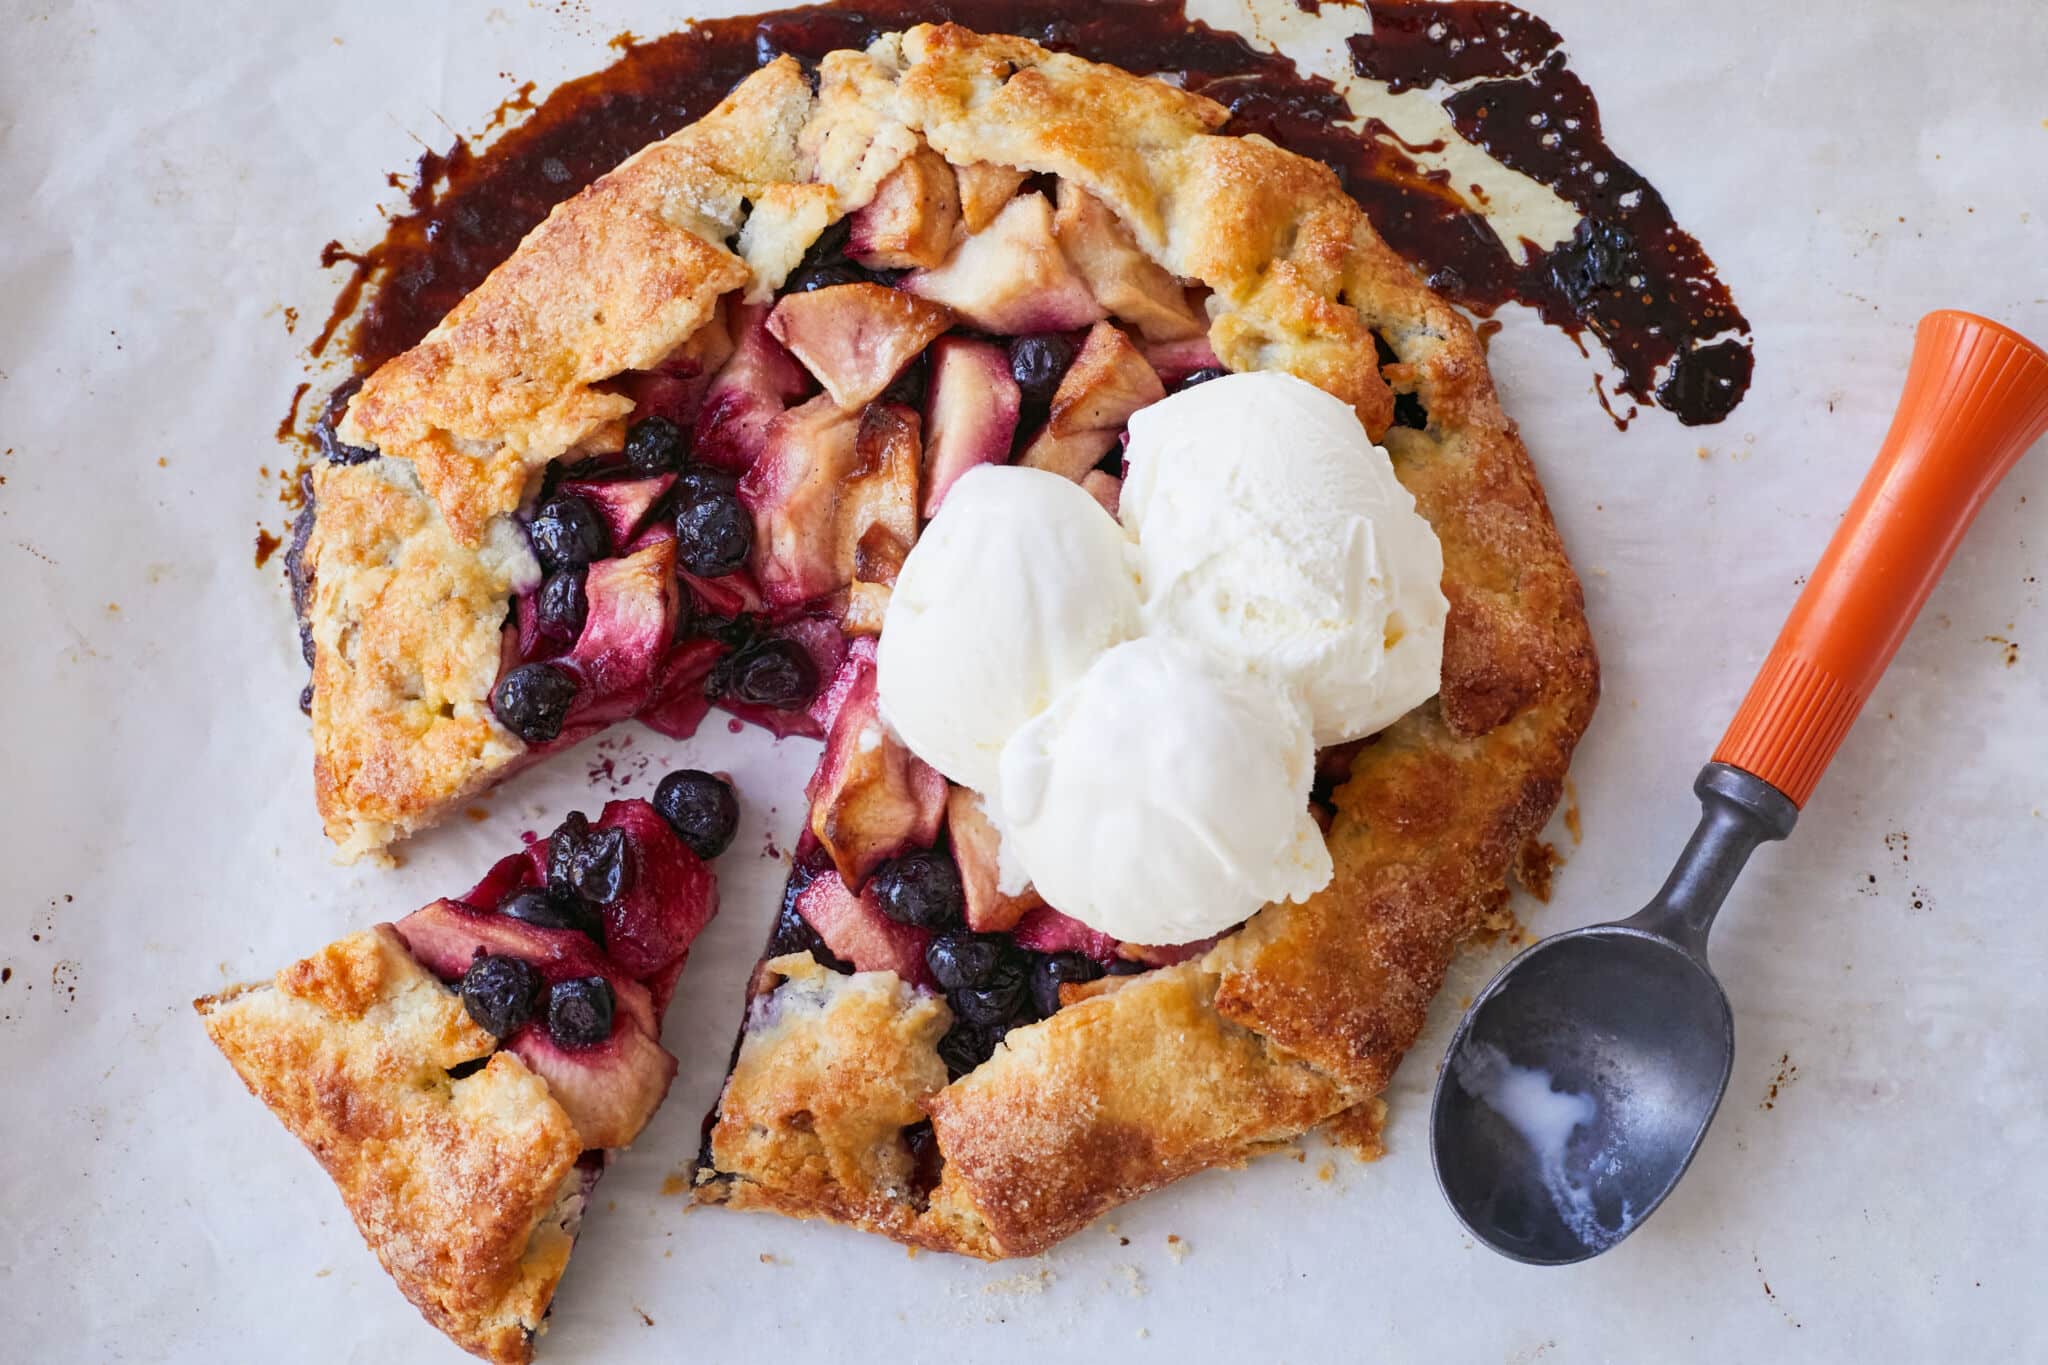 An Apple Blueberry and Vanilla Bean Galette is baked golden brown on the edges with juicy bubbling apples and blueberries in the center. It's served with 3 big scoops of vanilla ice cream on top. A serving was sliced of the whole galette.